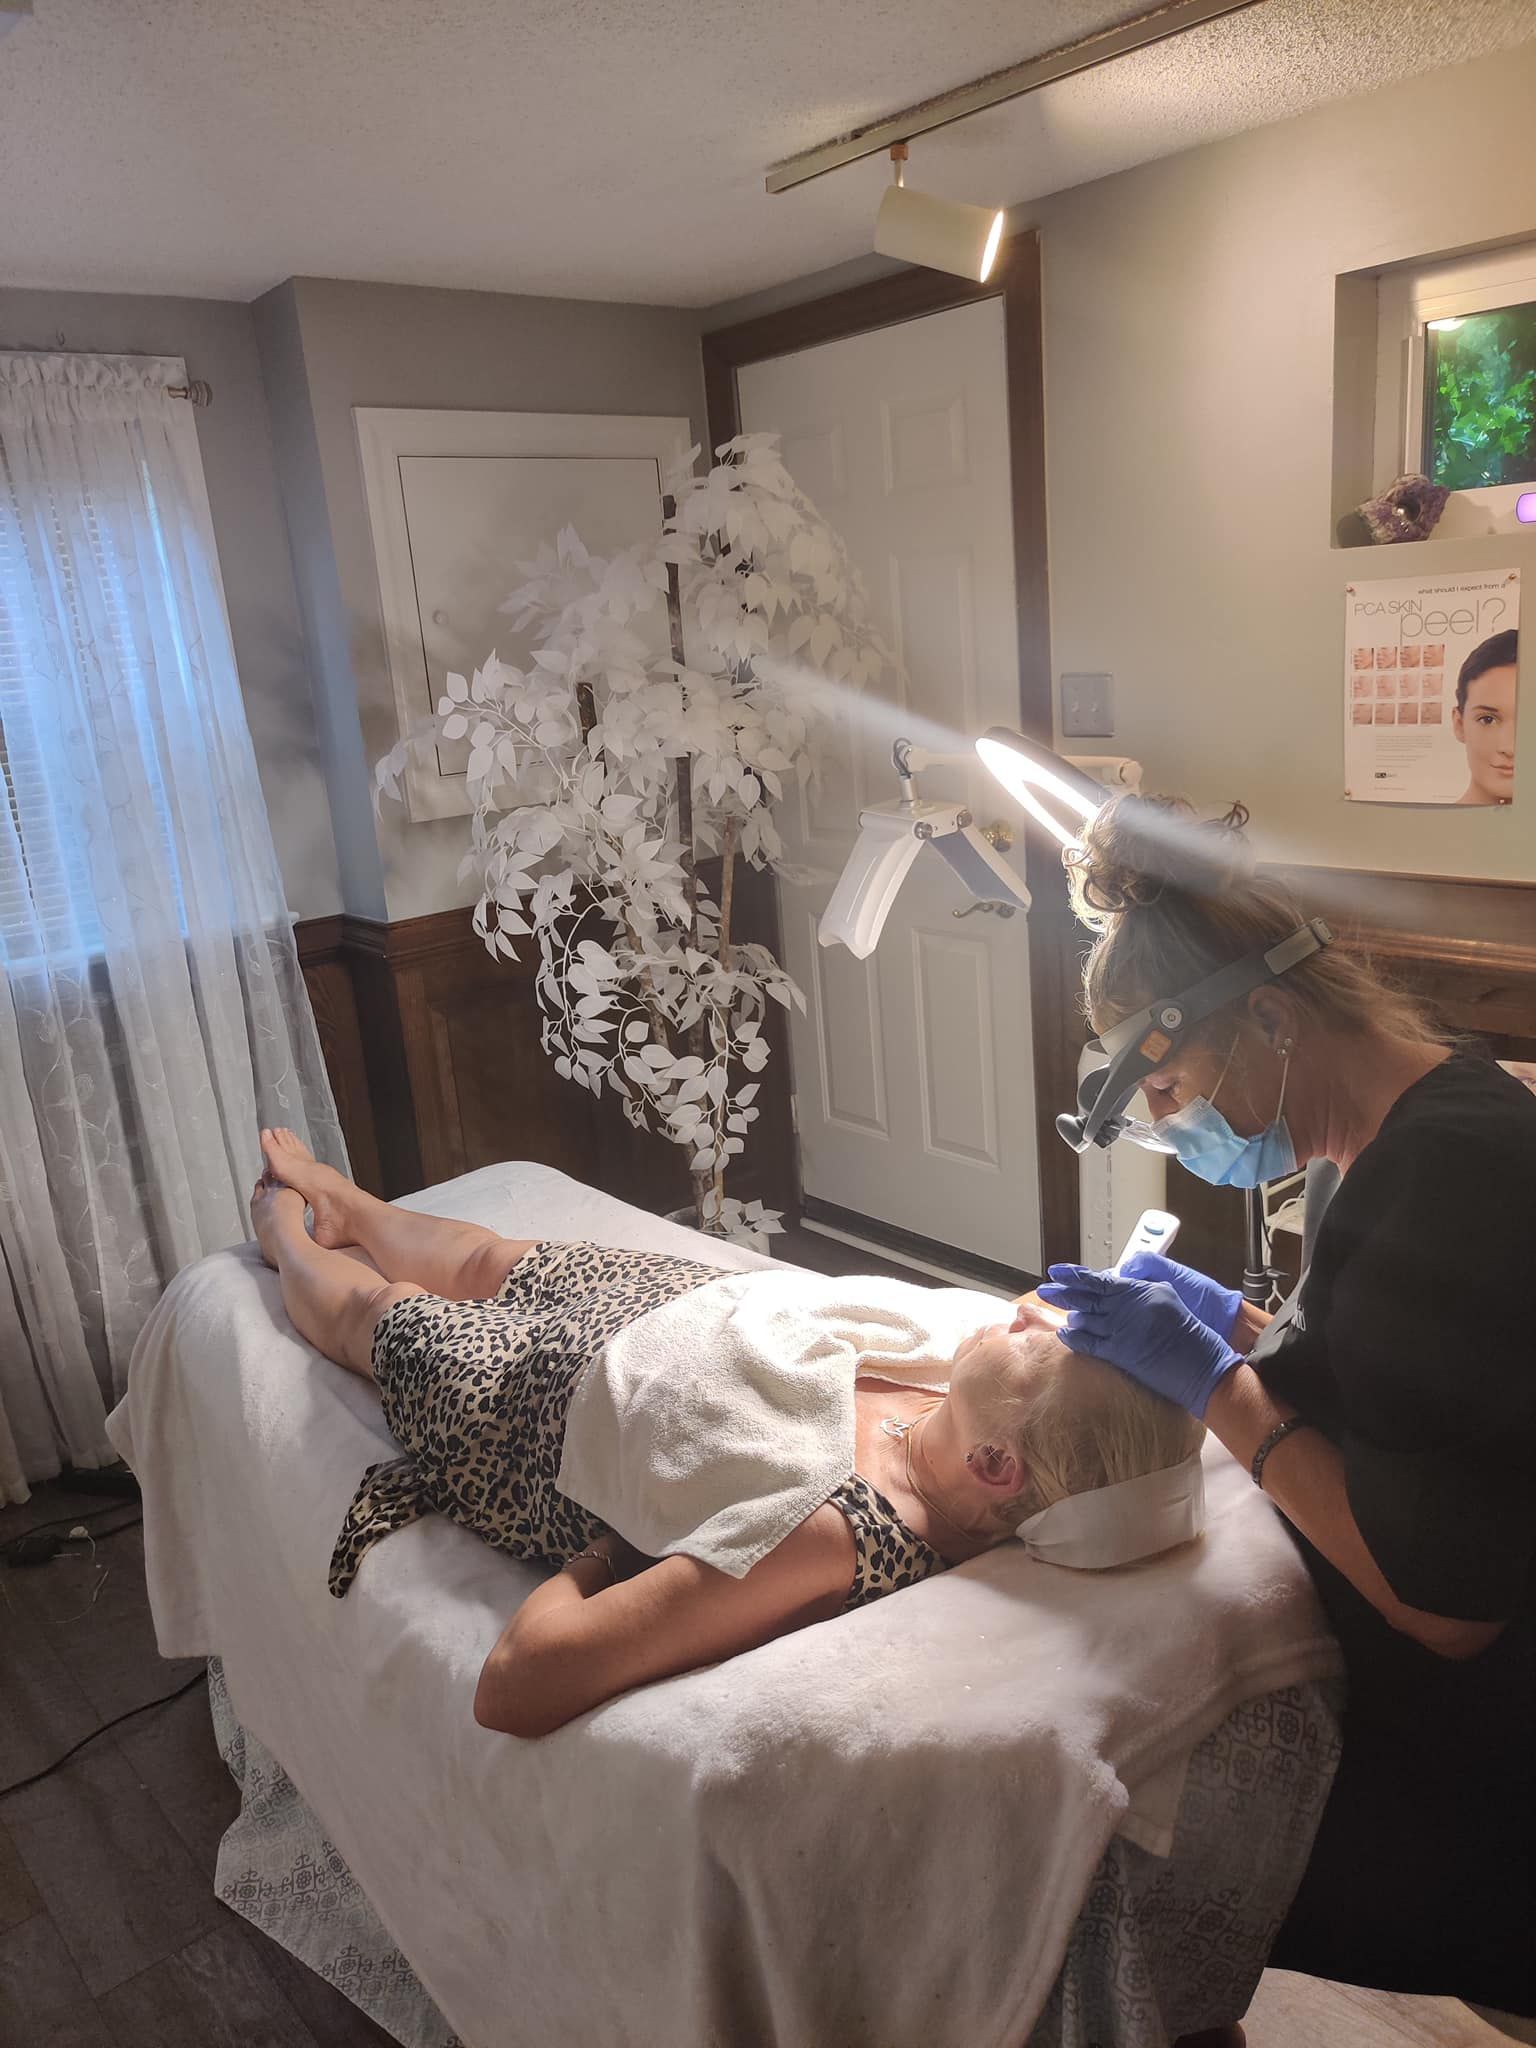 A woman is laying on a bed getting a facial treatment.